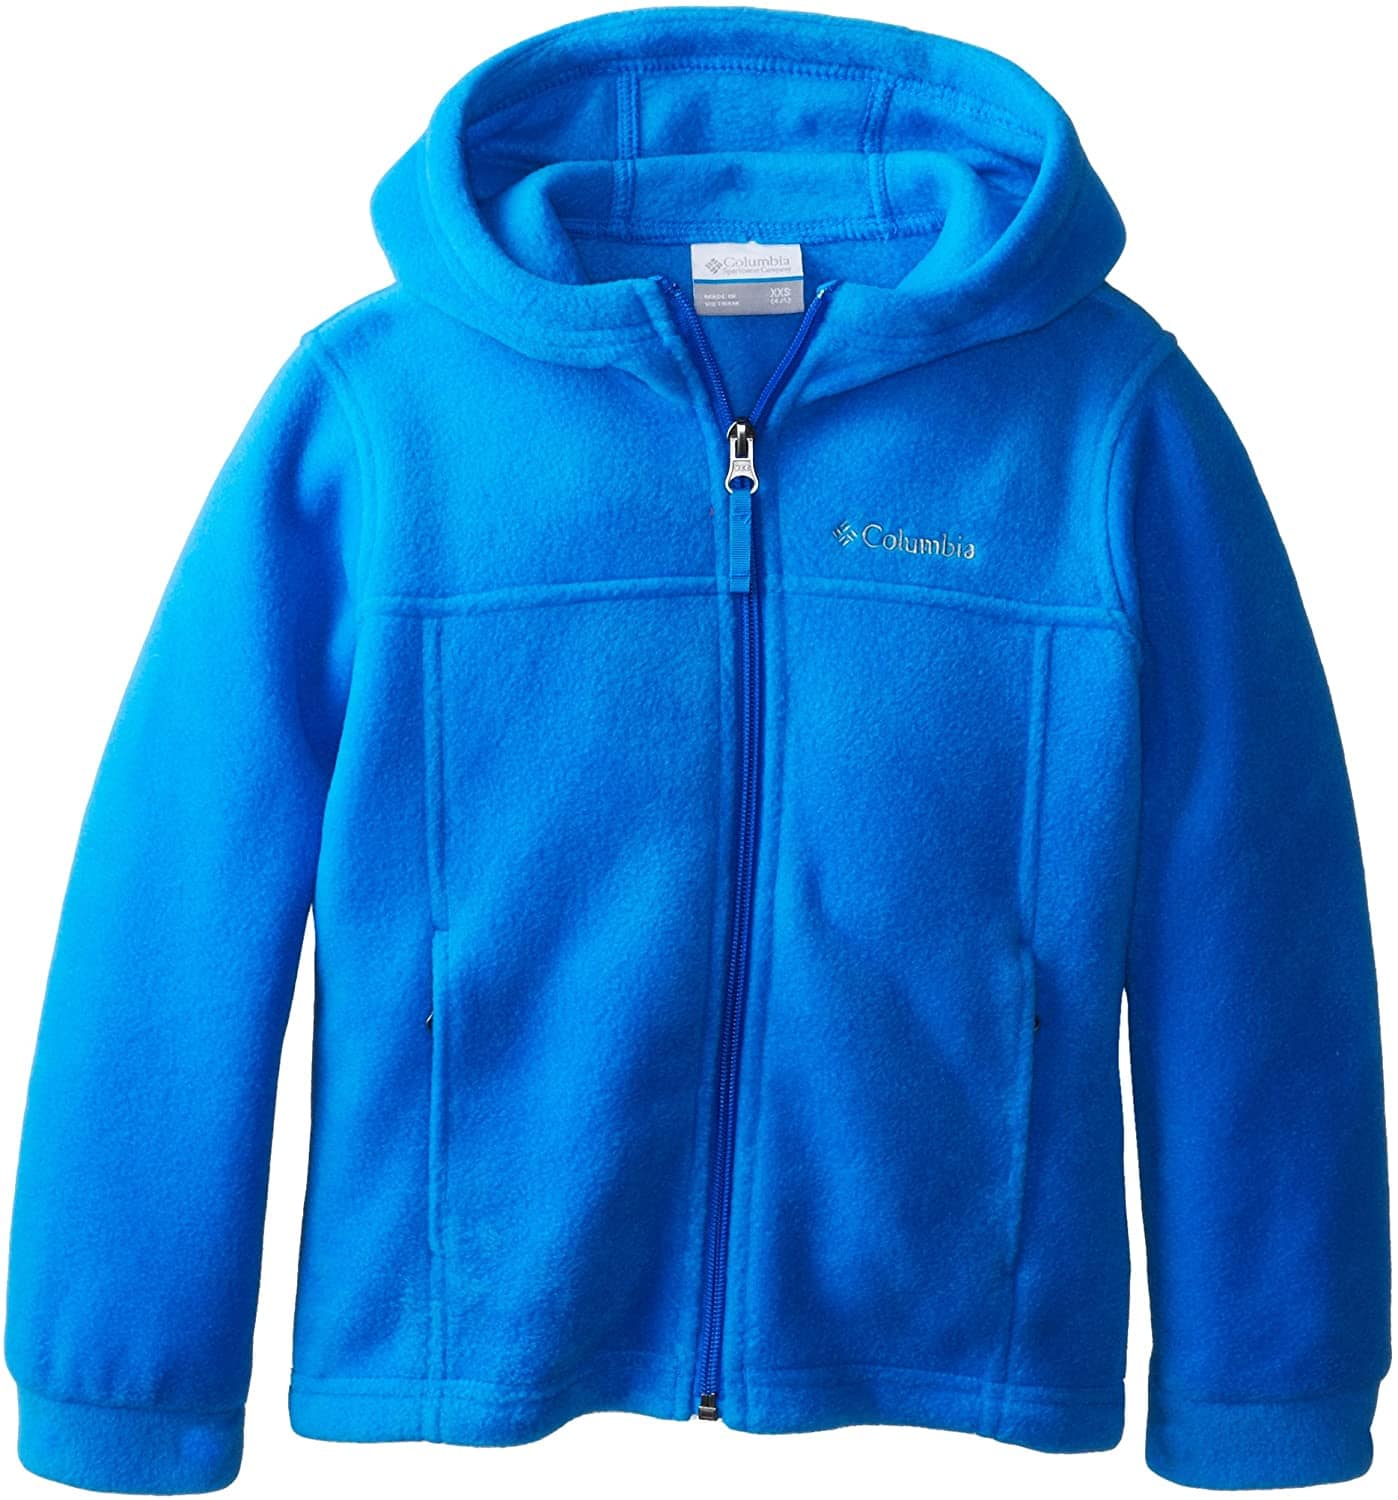 Columbia has a mini version of the Steens Mountain II fleece jacket for the boys